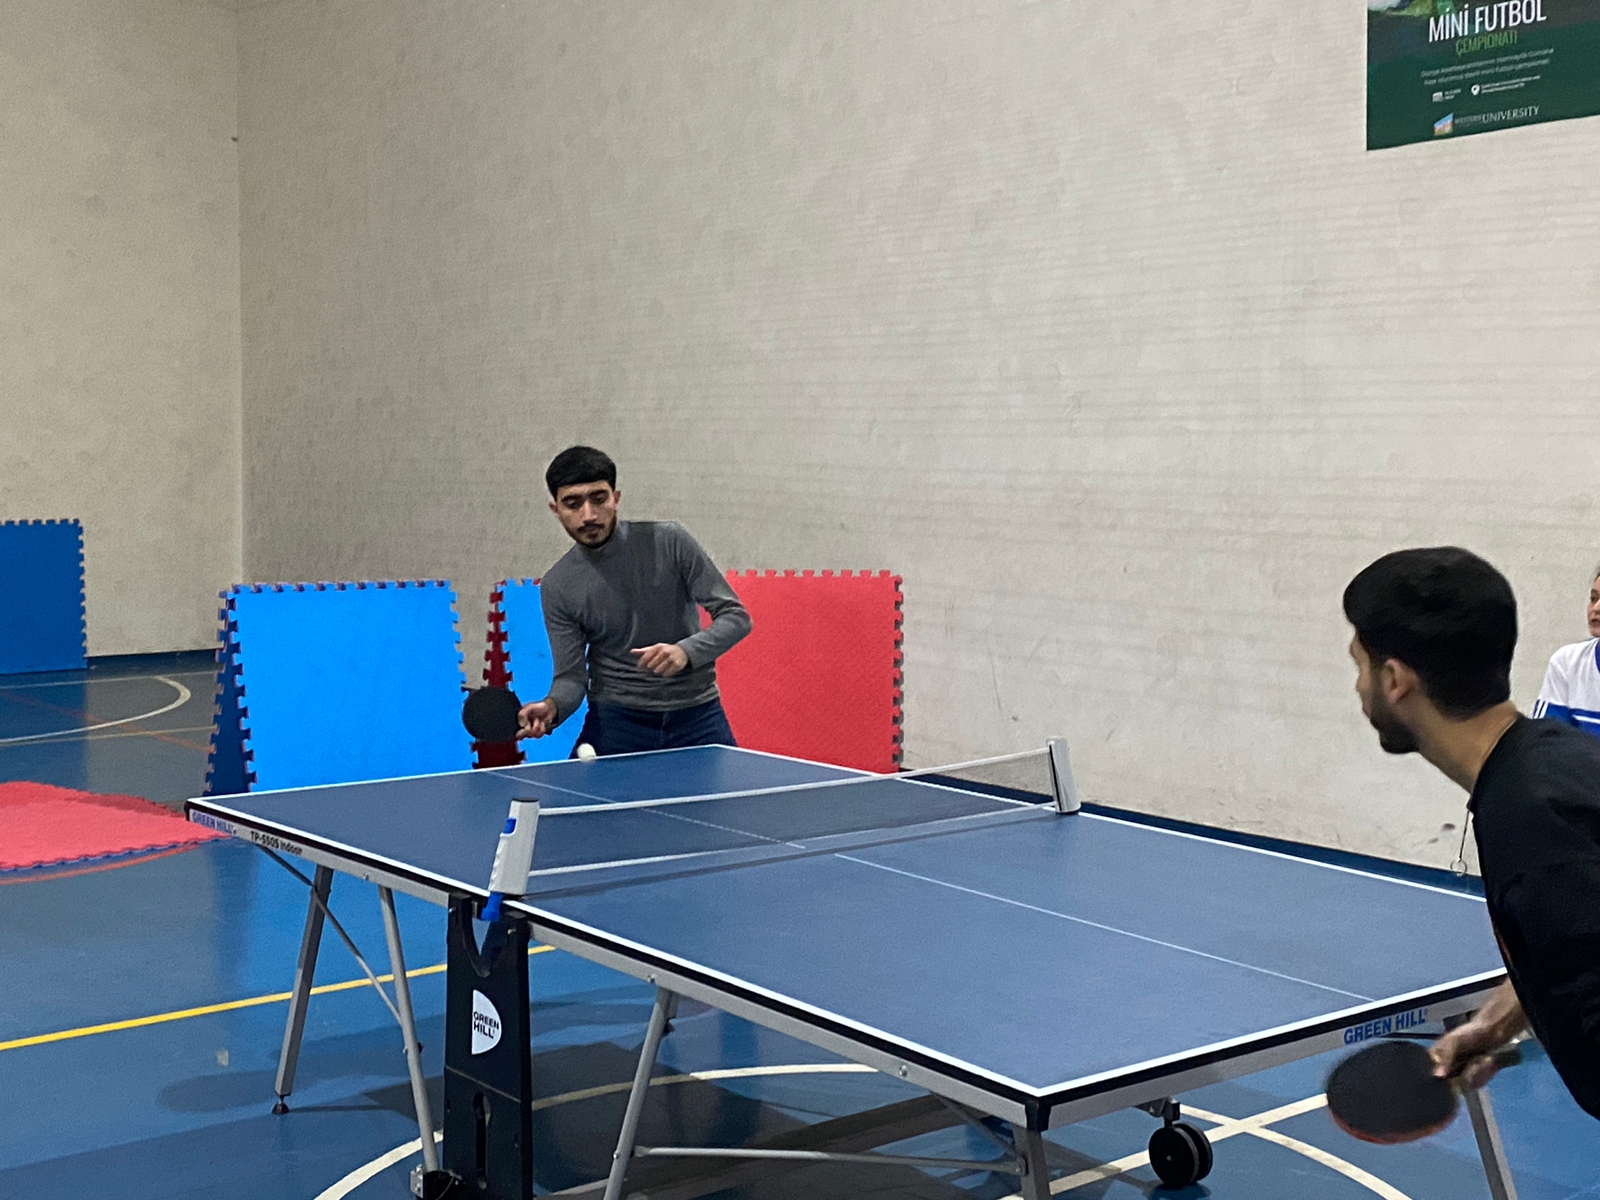 An intra-university table tennis tournament dedicated to "Youth Day" was held at Western Caspian University